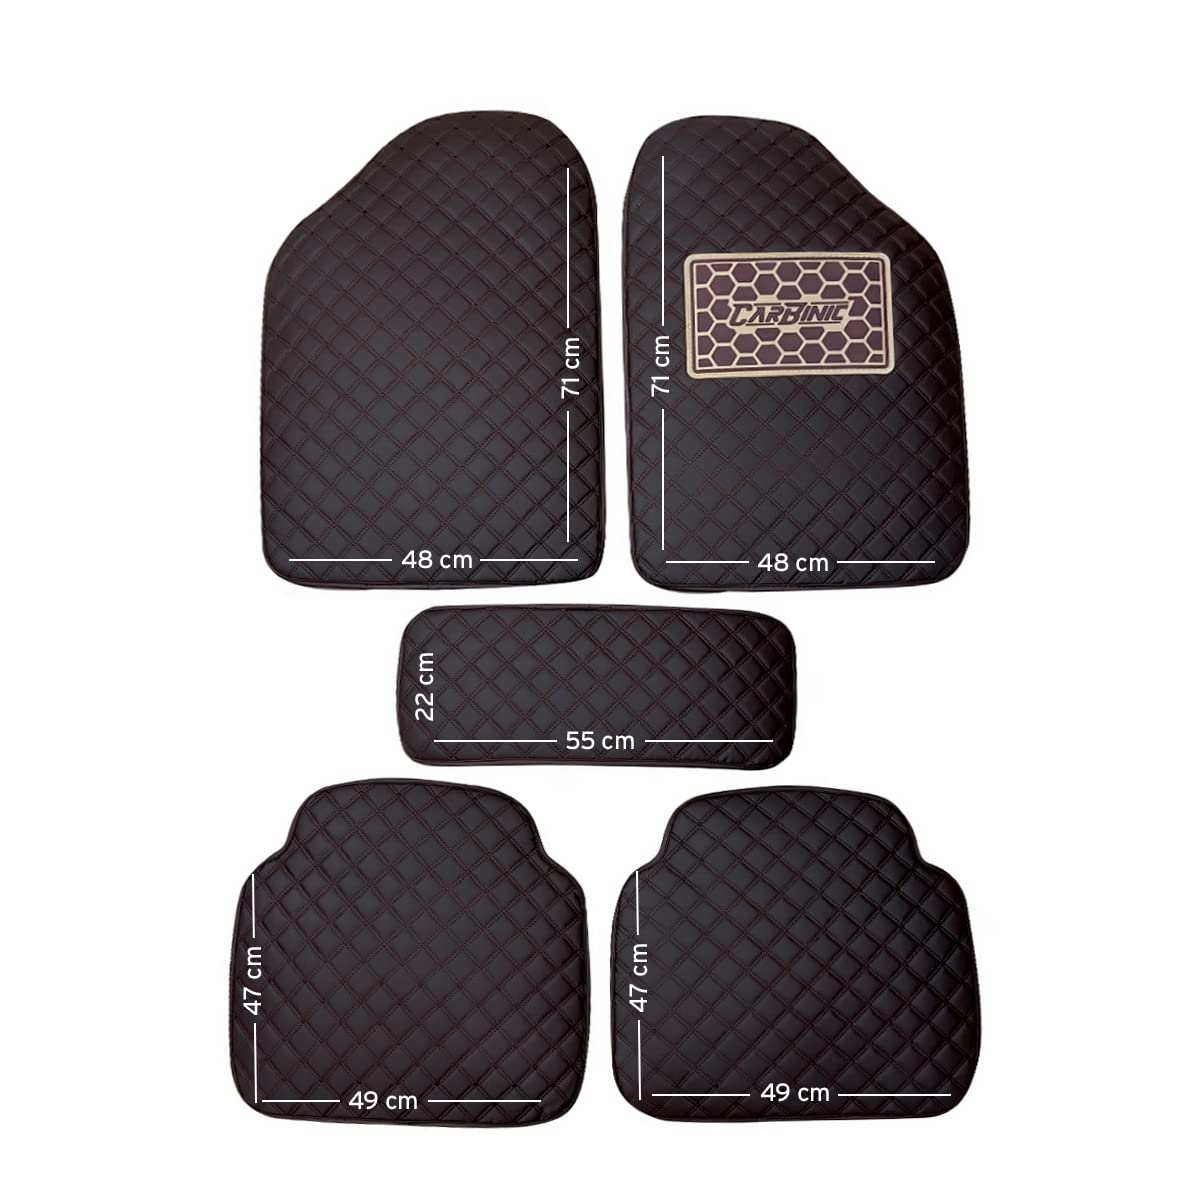 CarBinic 4D Premium Car Foot Mat - Universal Fits for All Cars | Premium Double Layered Leather| Shock Absorbent | Waterproof | Anti-Skid | Heel Pad | Car Accessories Interior (Coffee)